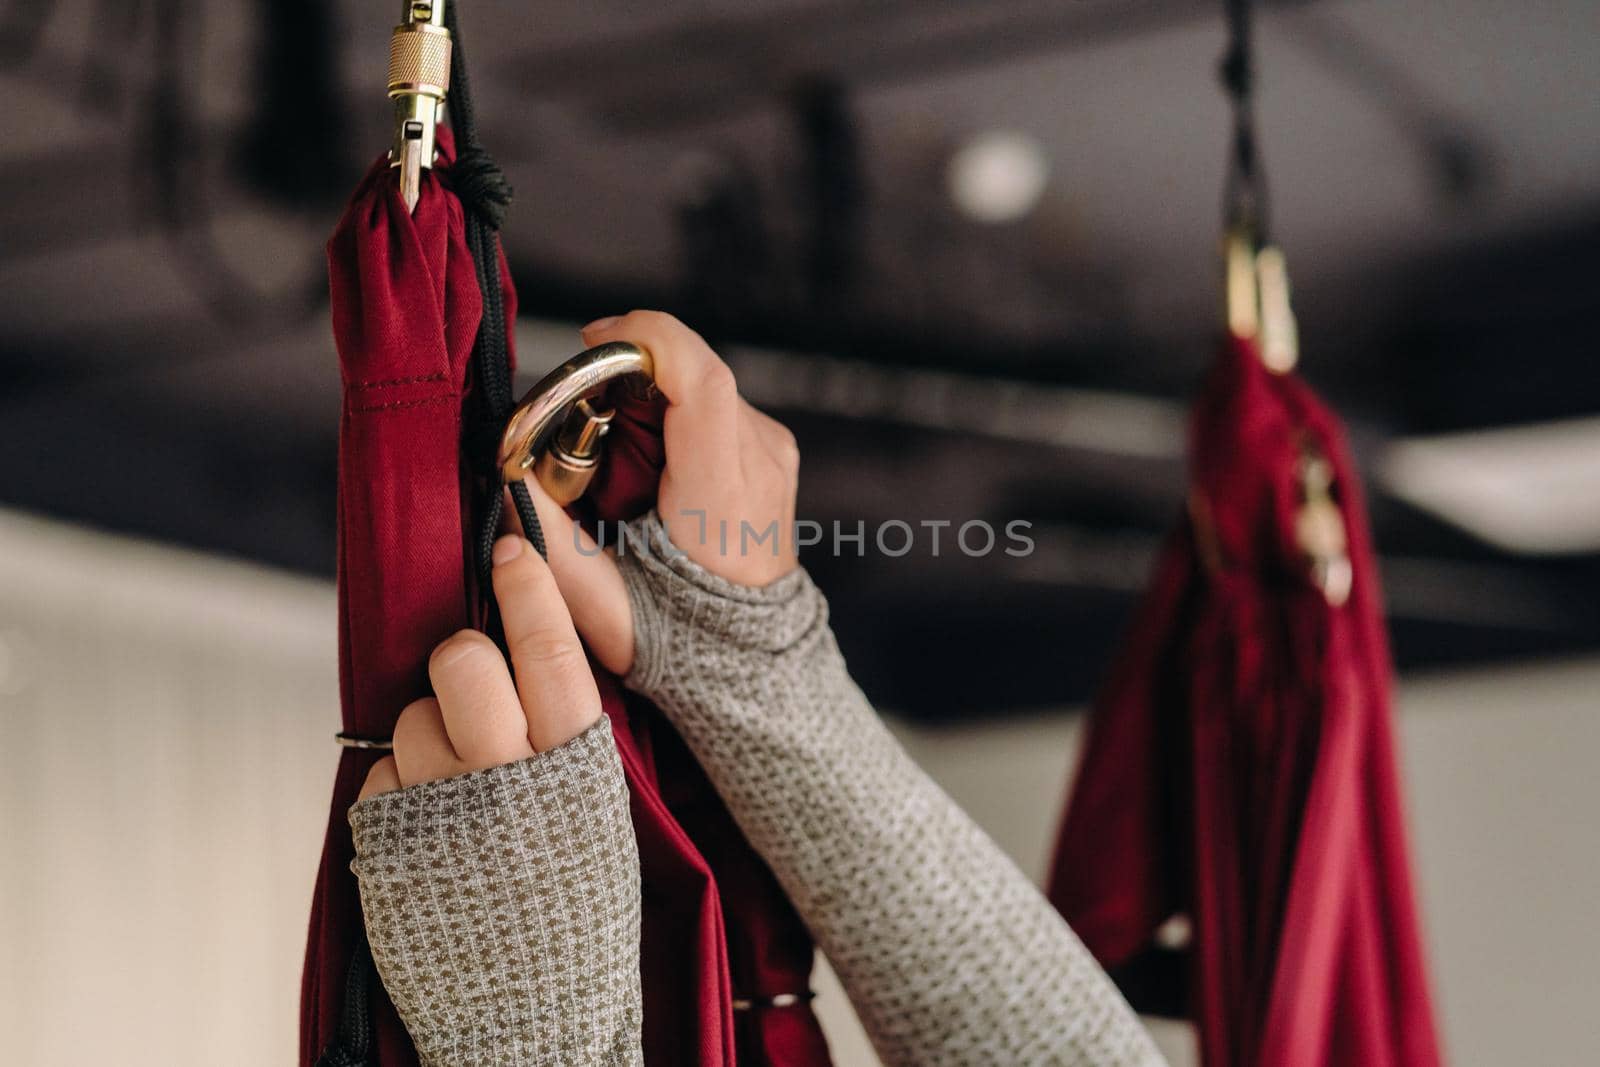 close-up of a girl's hands fastening a hook to a hanging hammock for yoga classes in the gym.